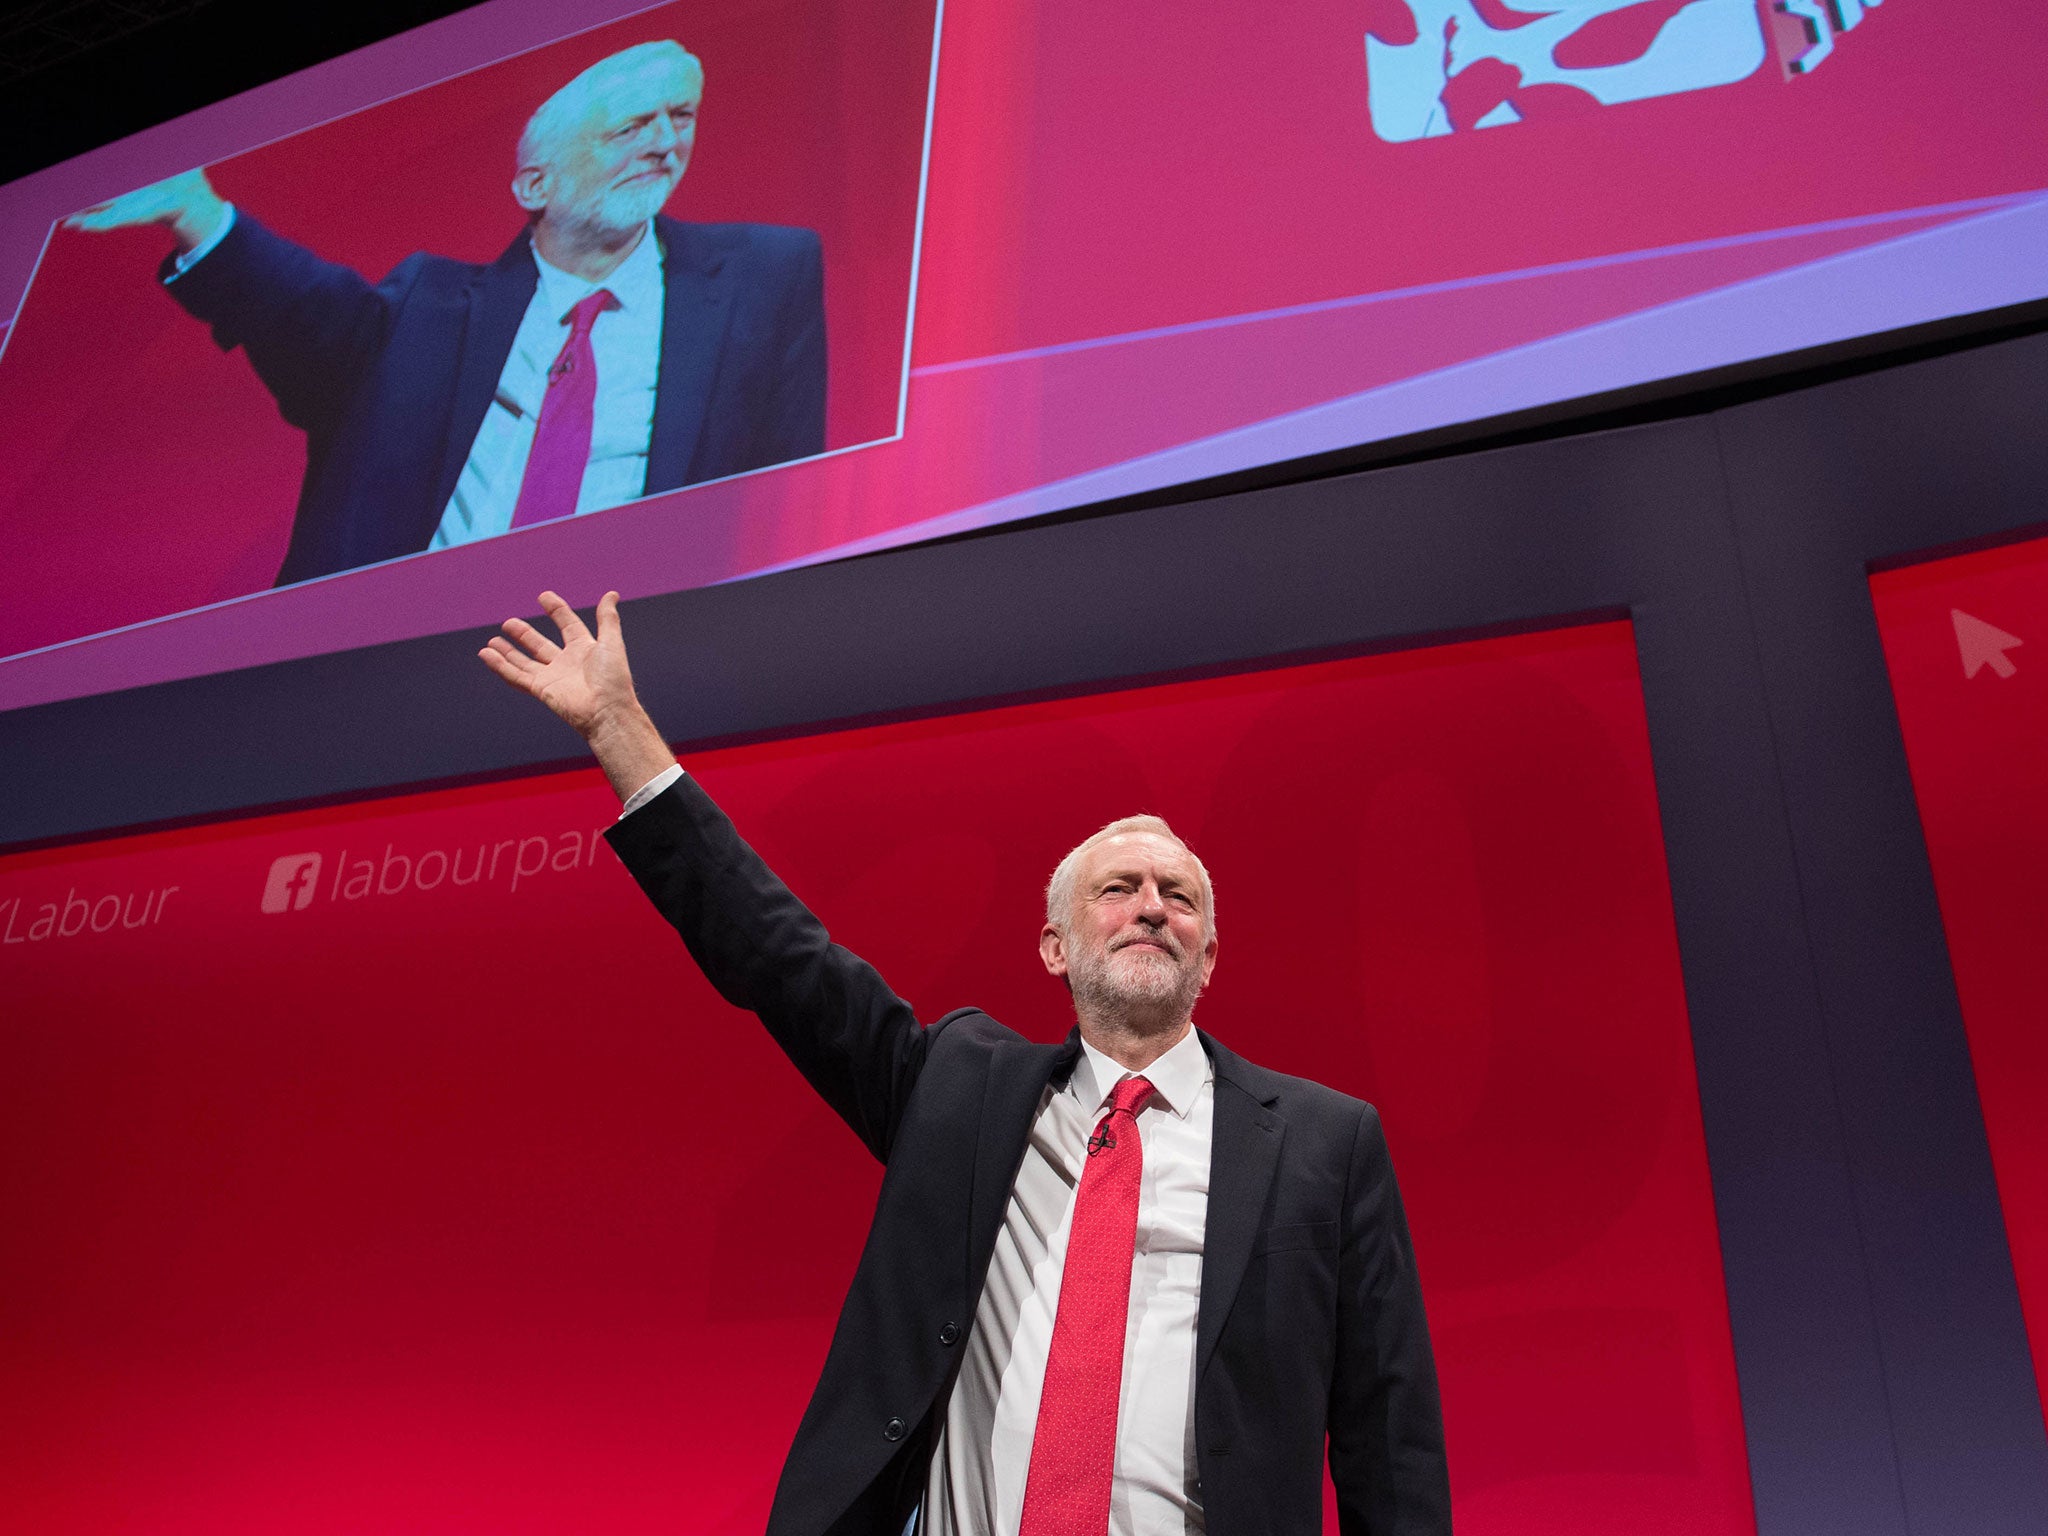 Despite all the plotting to oust him, Jeremy Corbyn stood tall at the Labour Party conference